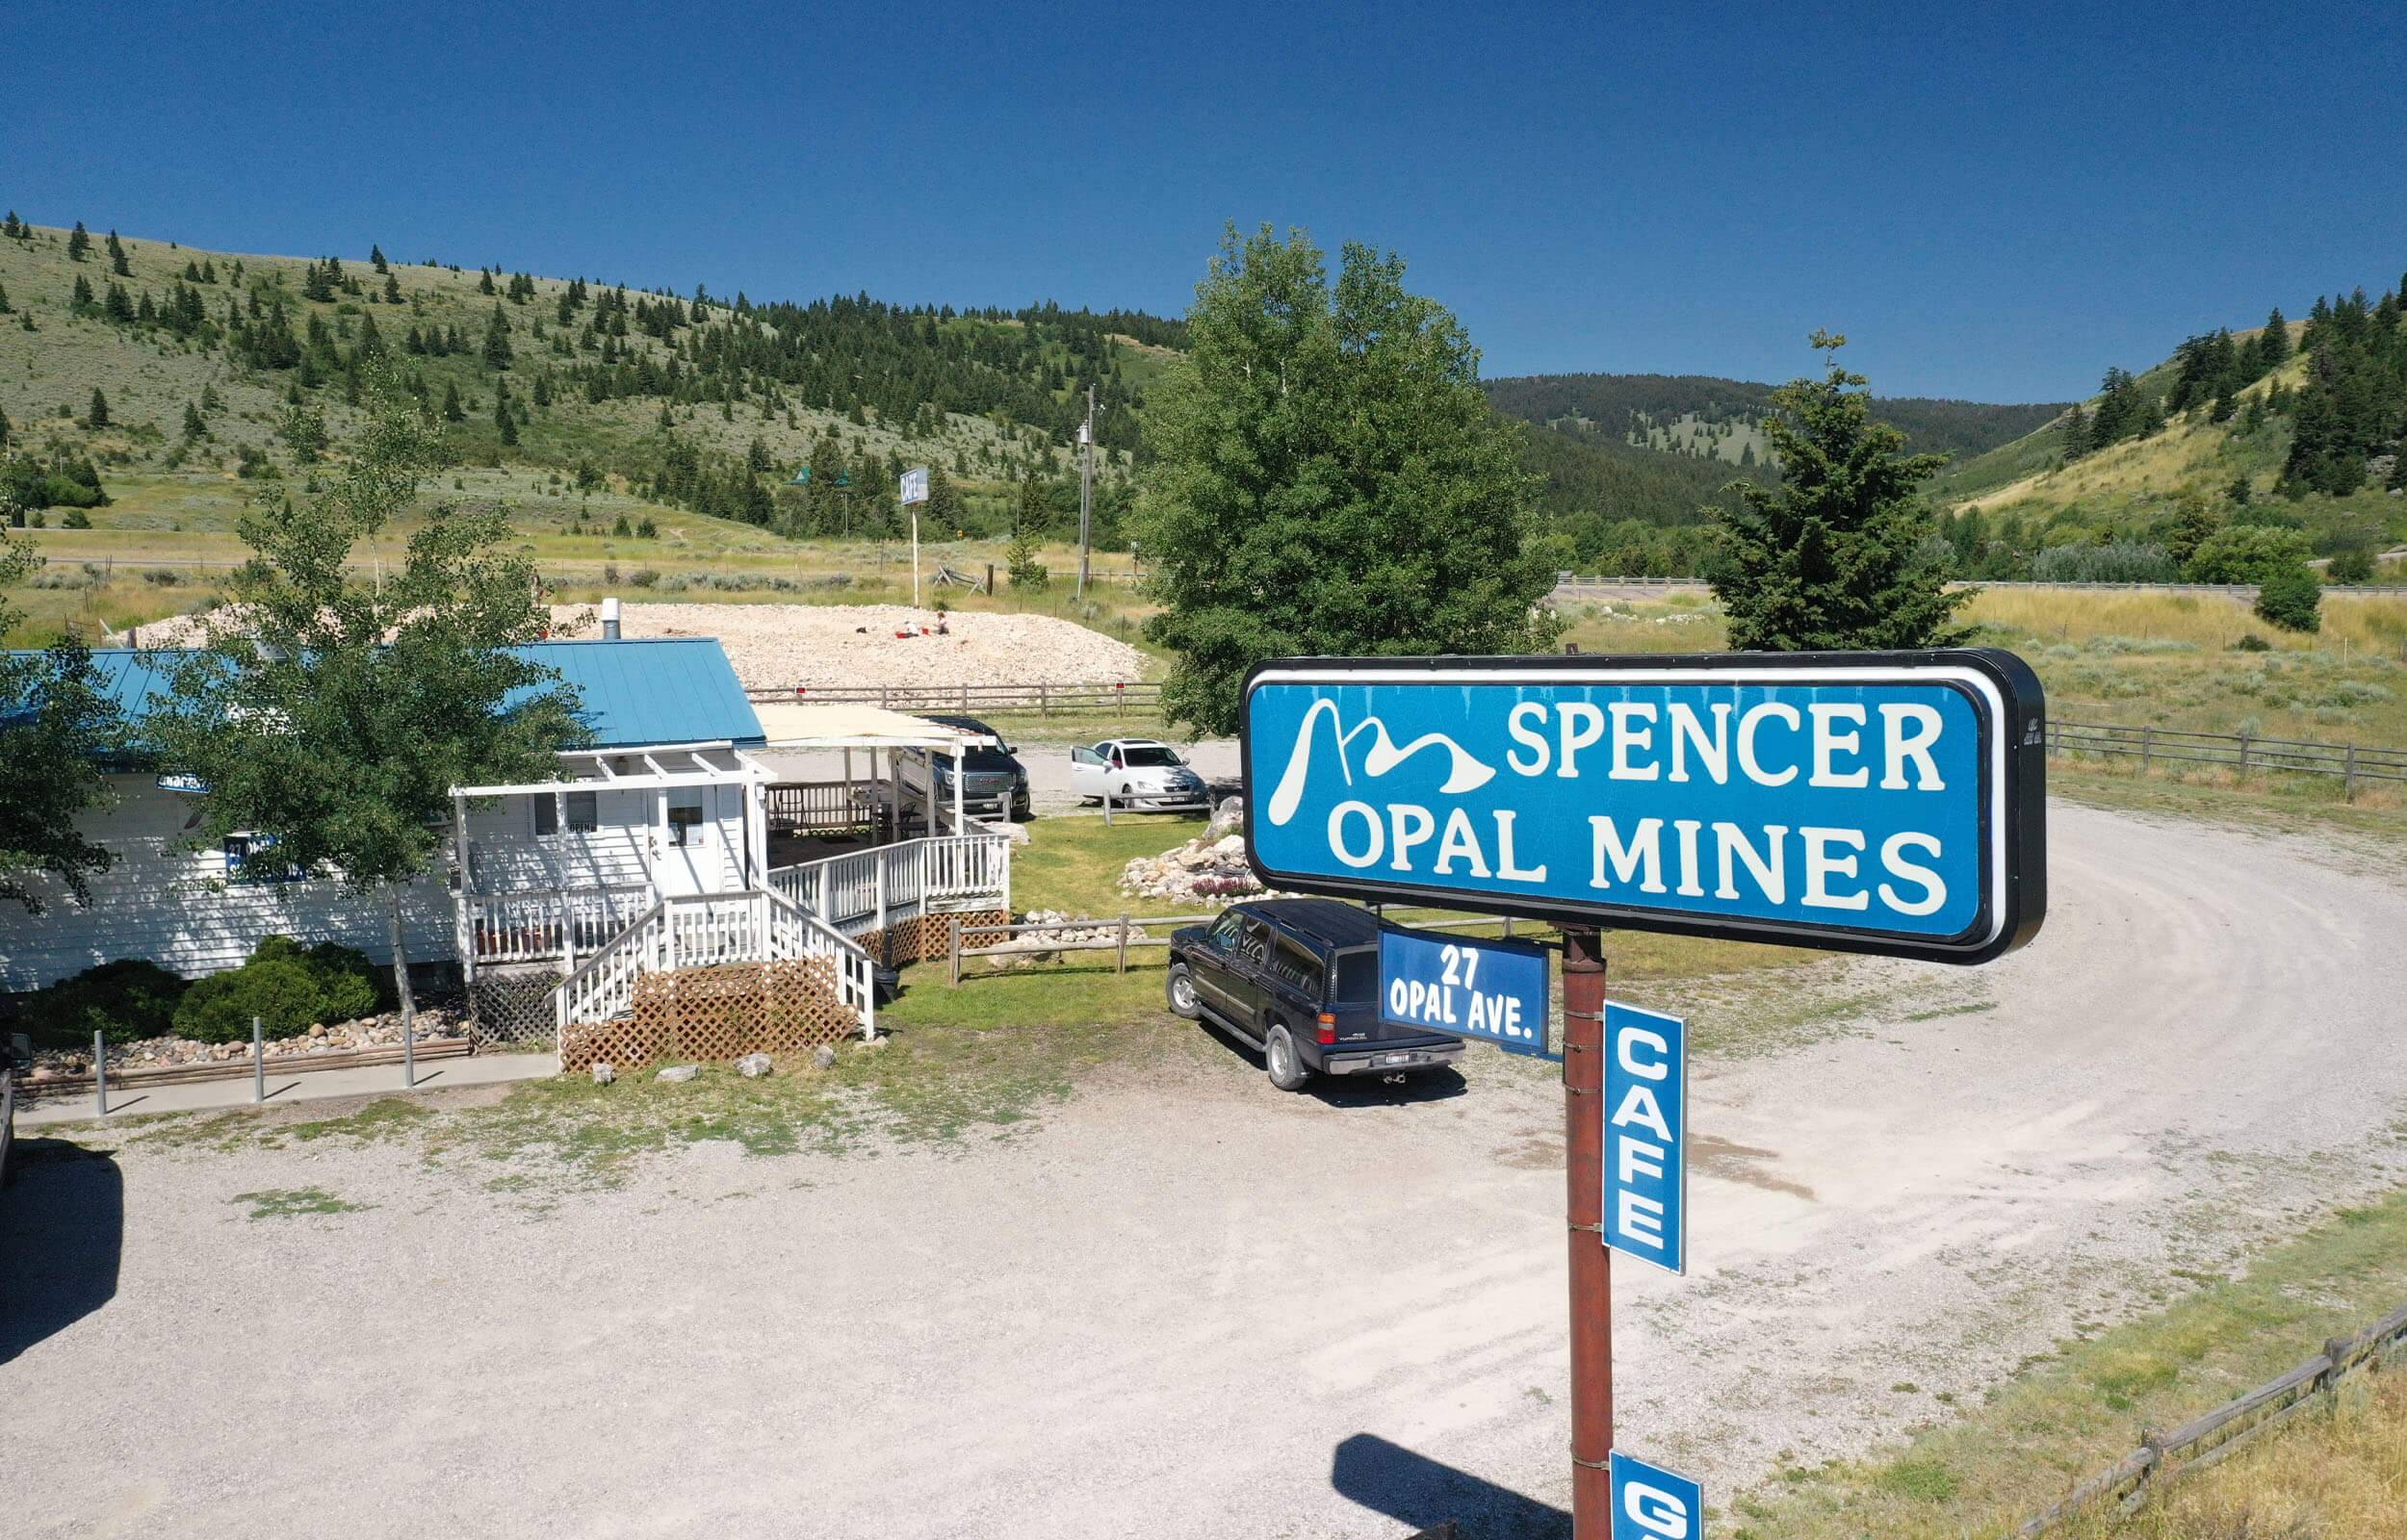 A blue sign for Spencer Opal Mines.